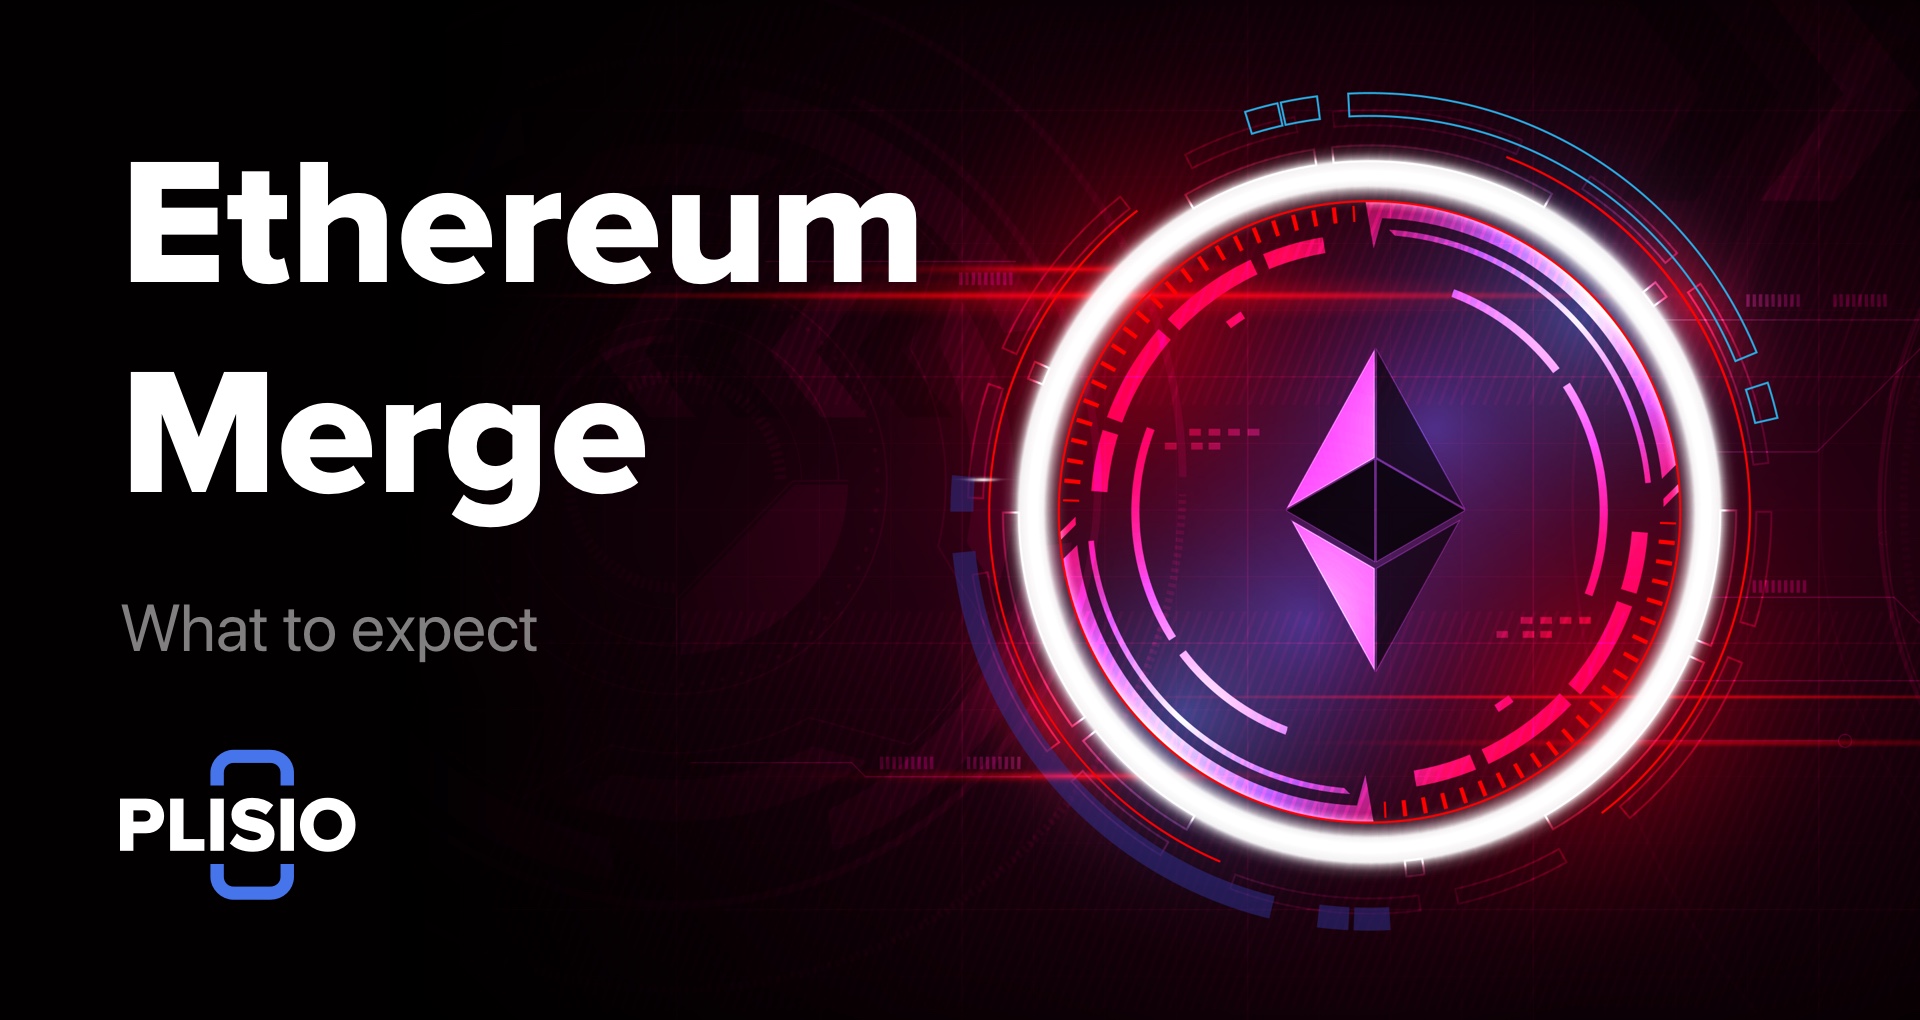 Ethereum Merge. What to expect.